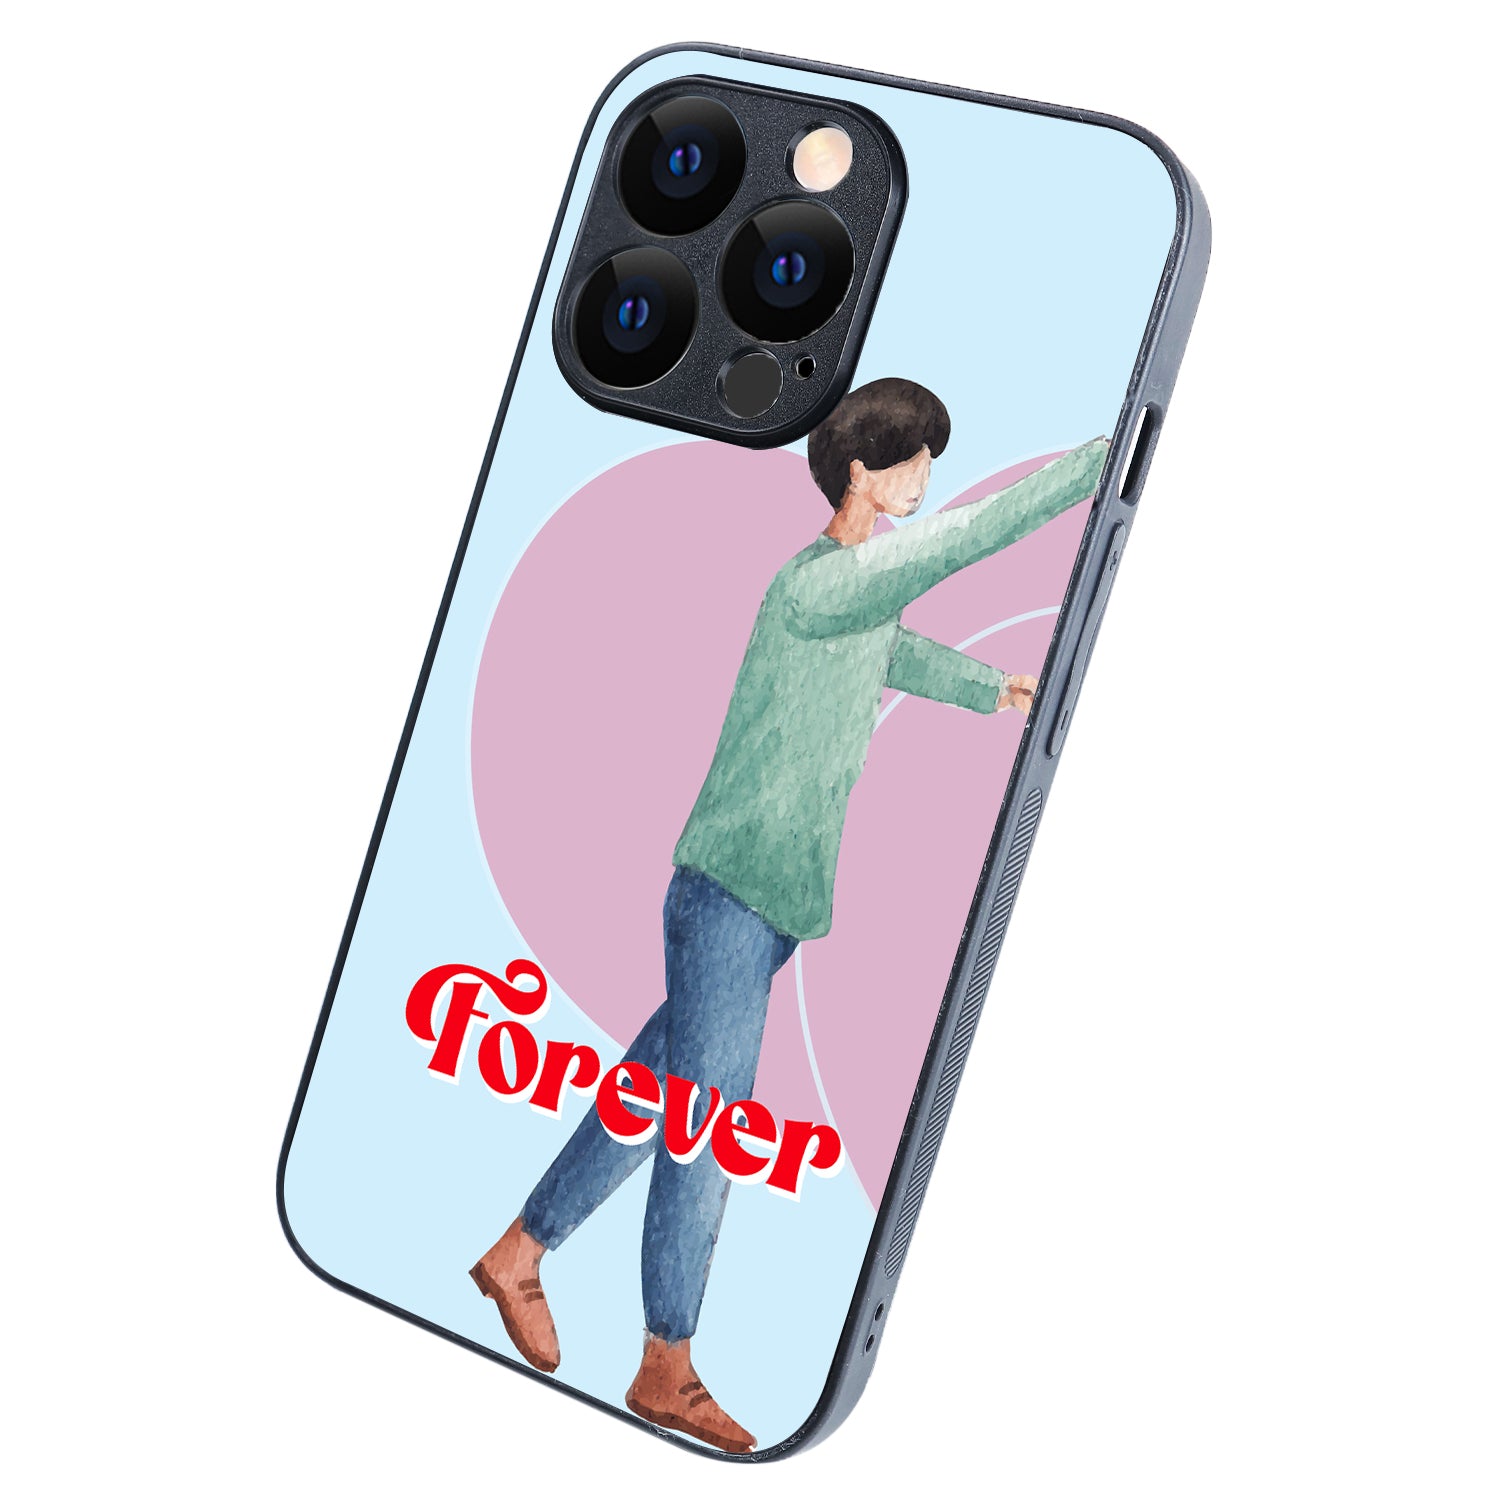 Forever Love Boy Couple iPhone 13 Pro Case